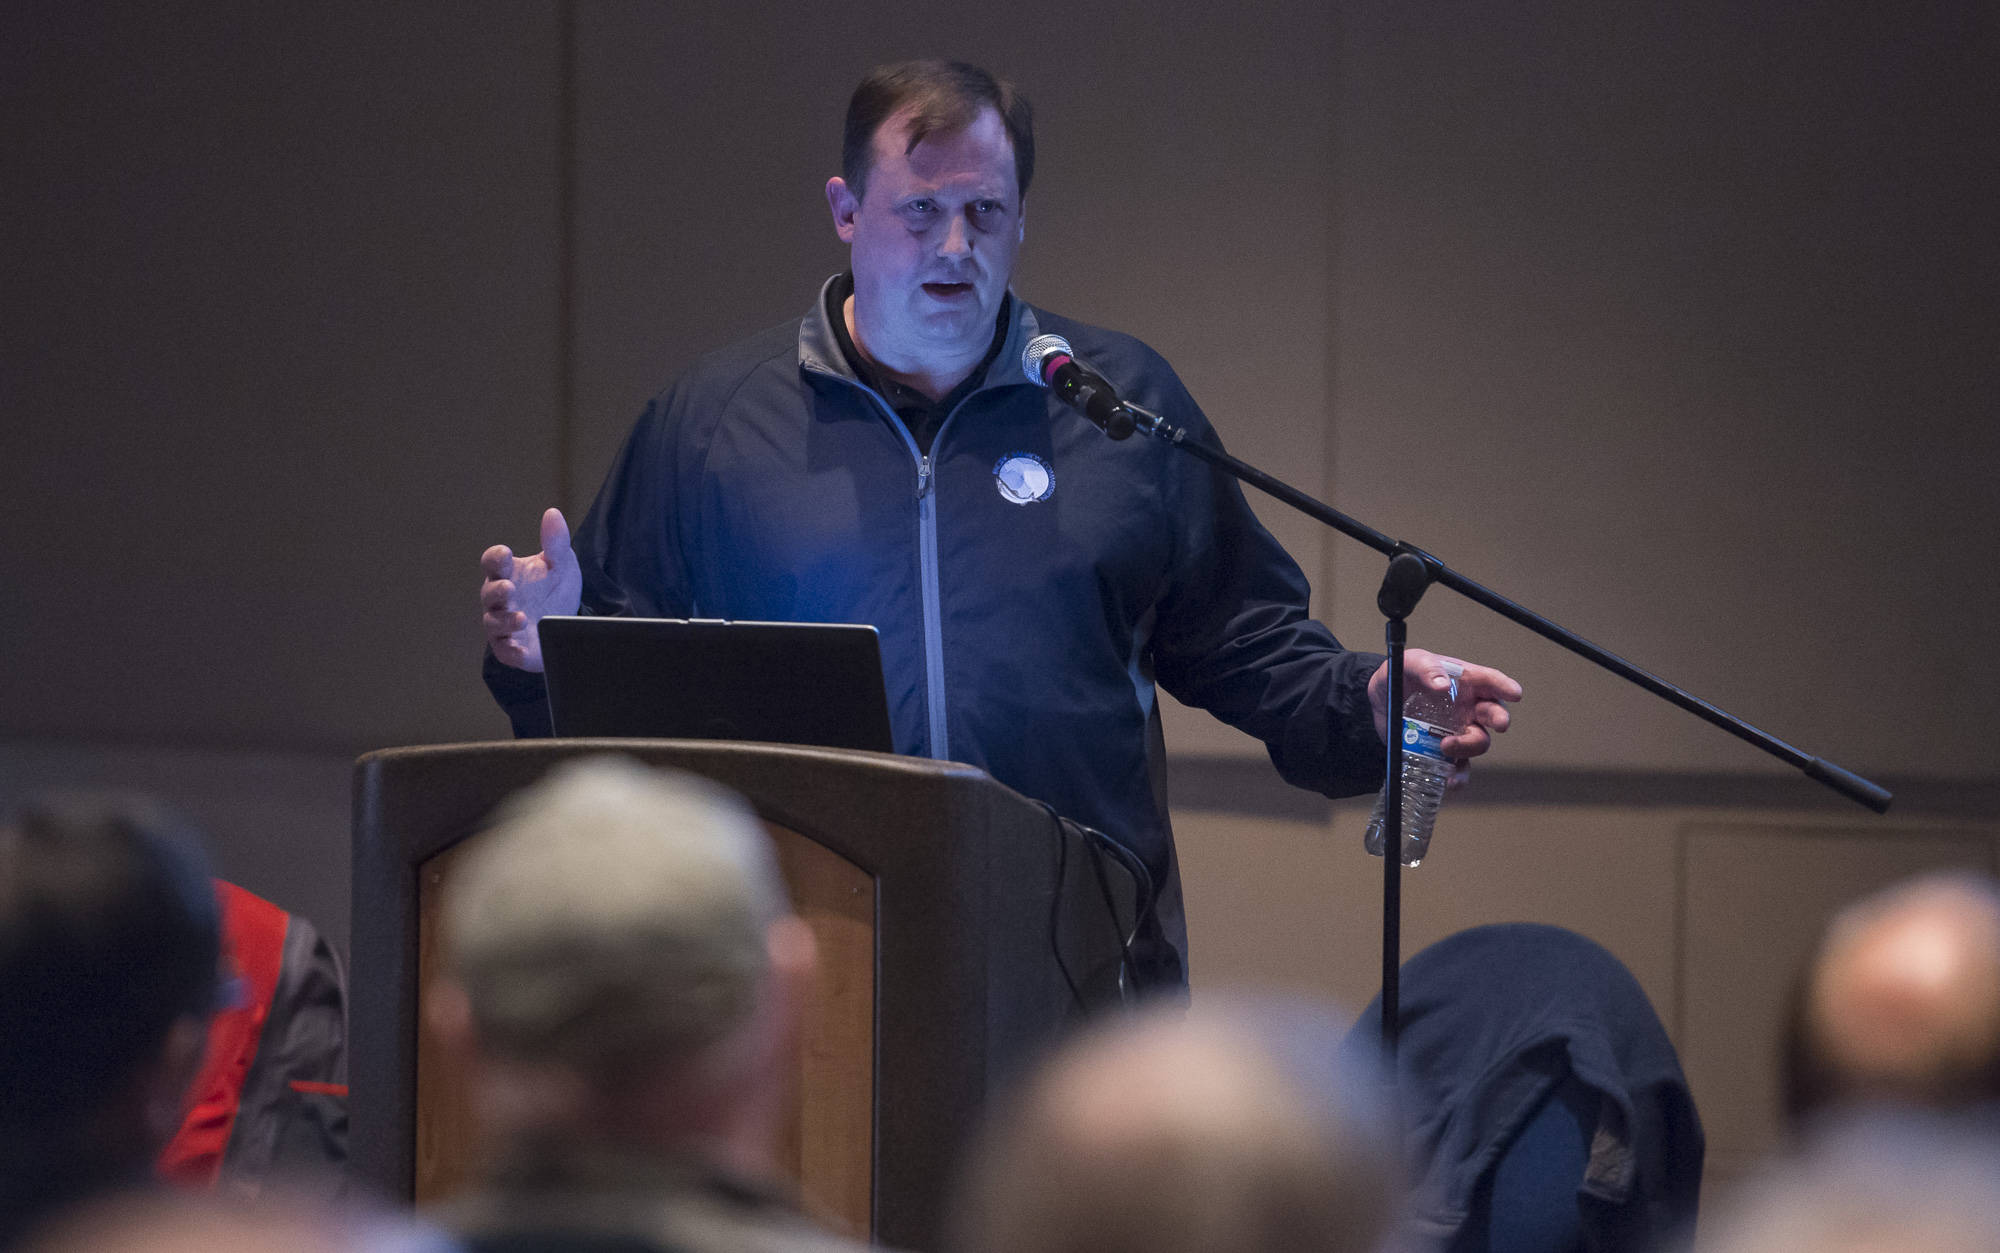 Ed Jones, Fish and Game Coodinator for the Division of Sport Fish at the Department of Fish and Game, speaks during the King Salmon Symposium sponsored by the Territorial Sportsmen at Centennial Hall on Monday, April 16, 2018.